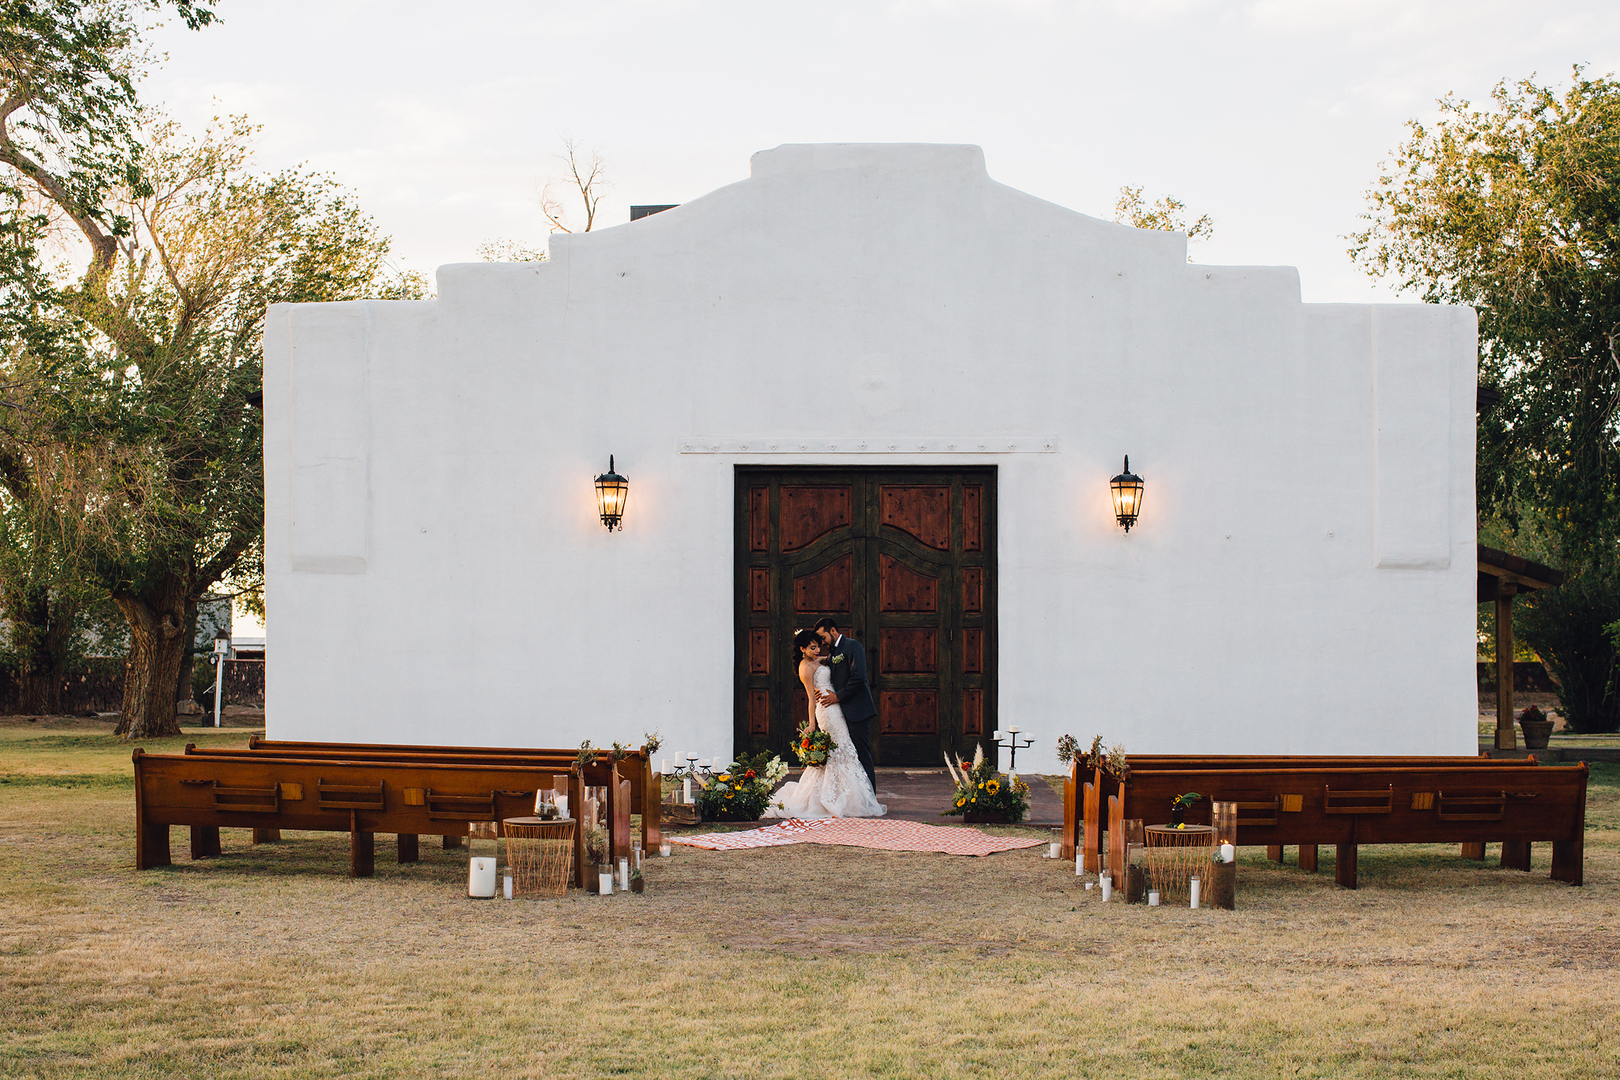 Southwestern Themed Wedding in New Mexico